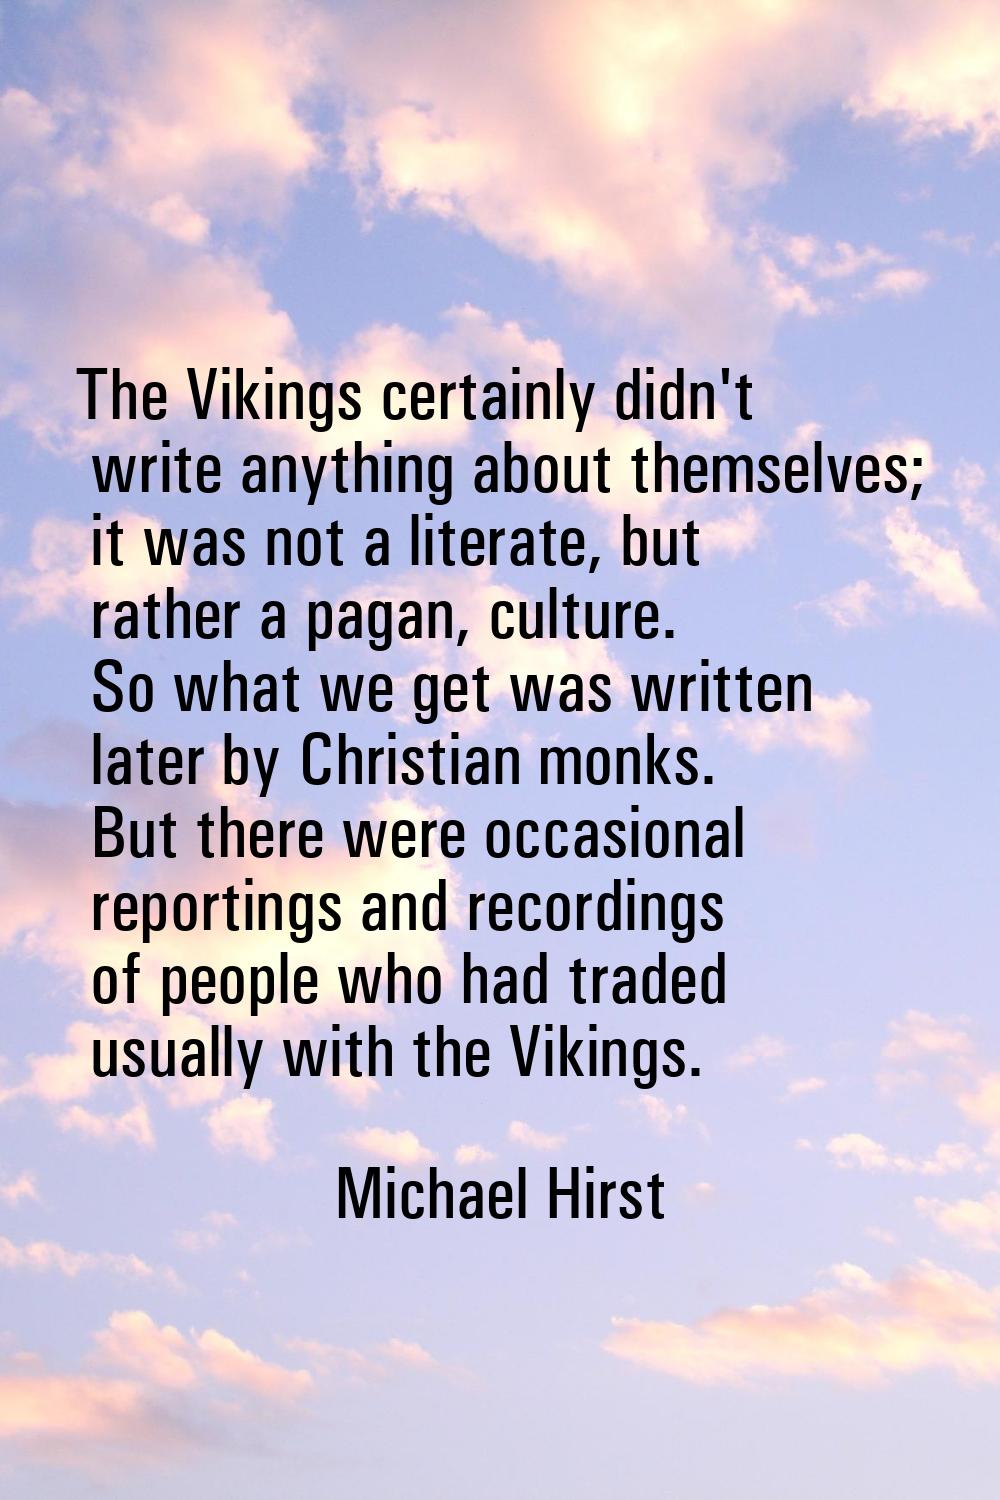 The Vikings certainly didn't write anything about themselves; it was not a literate, but rather a p